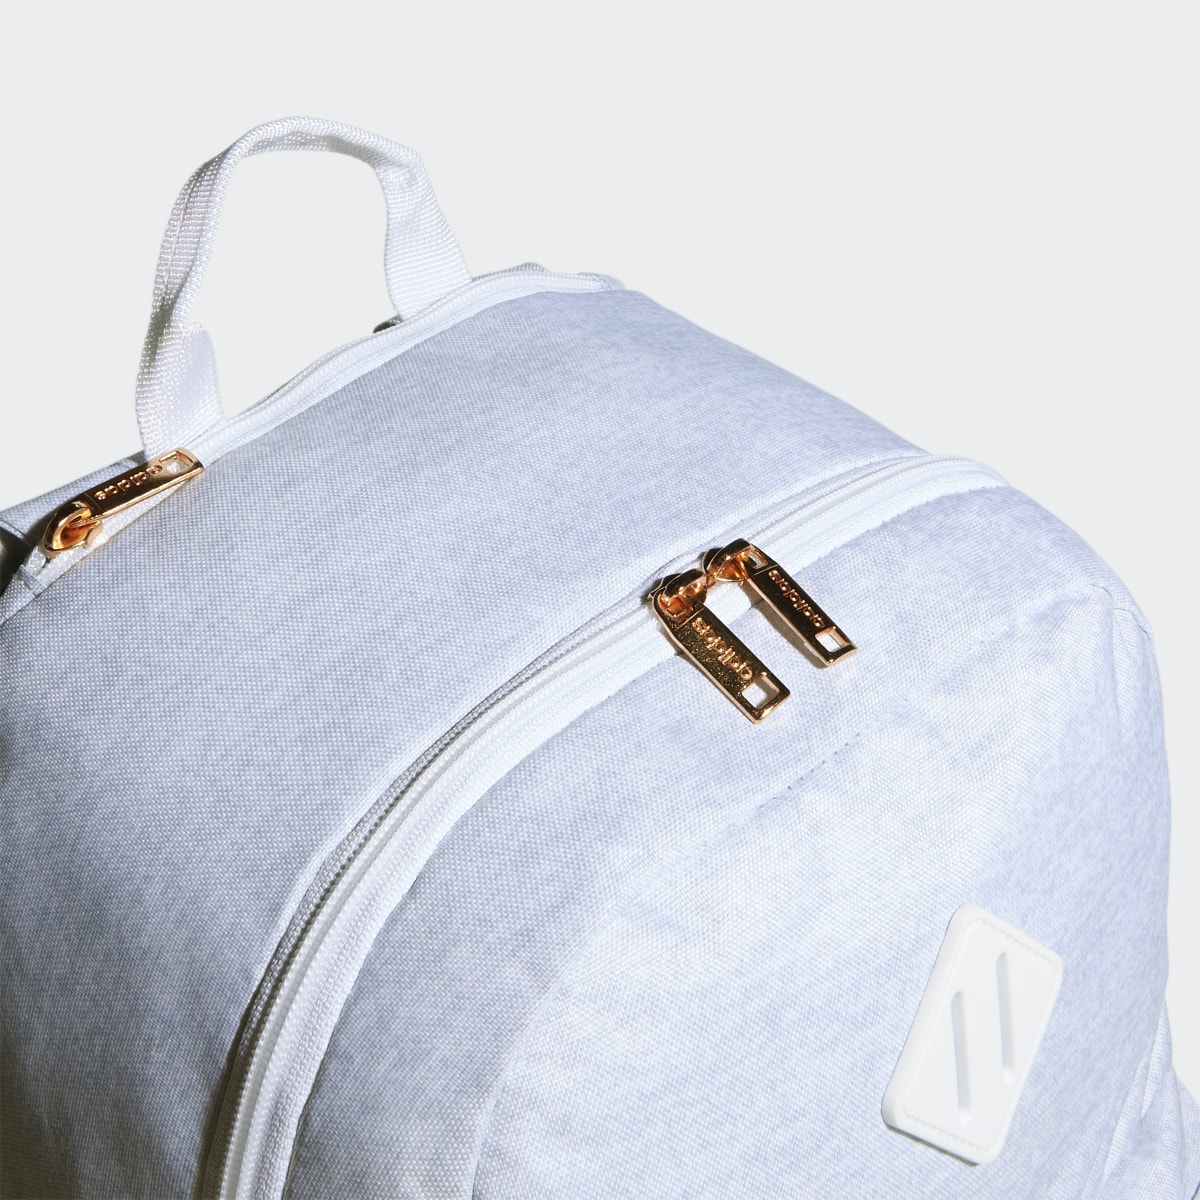 Adidas Classic 3-Stripes Backpack. 6